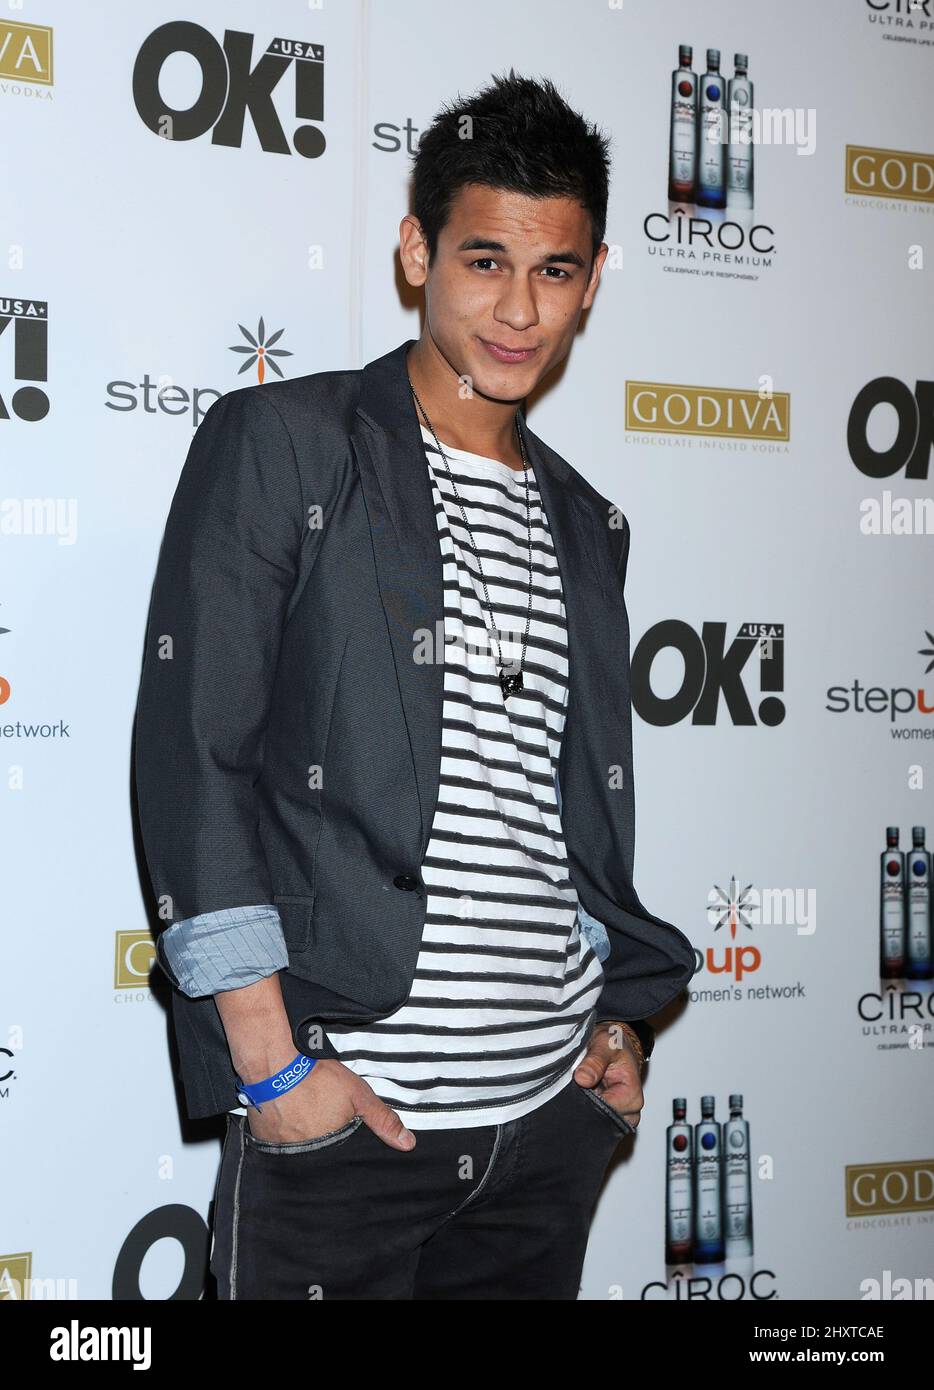 Bronson Pelletier arrives at the Ciroc Vodka and OK! Magazine 'Women of Music Celebration' hosted by Nicole Scherzinger in association with Step Up Women's Network at The Colony on February 11, 2011 in Hollywood, California. Stock Photo